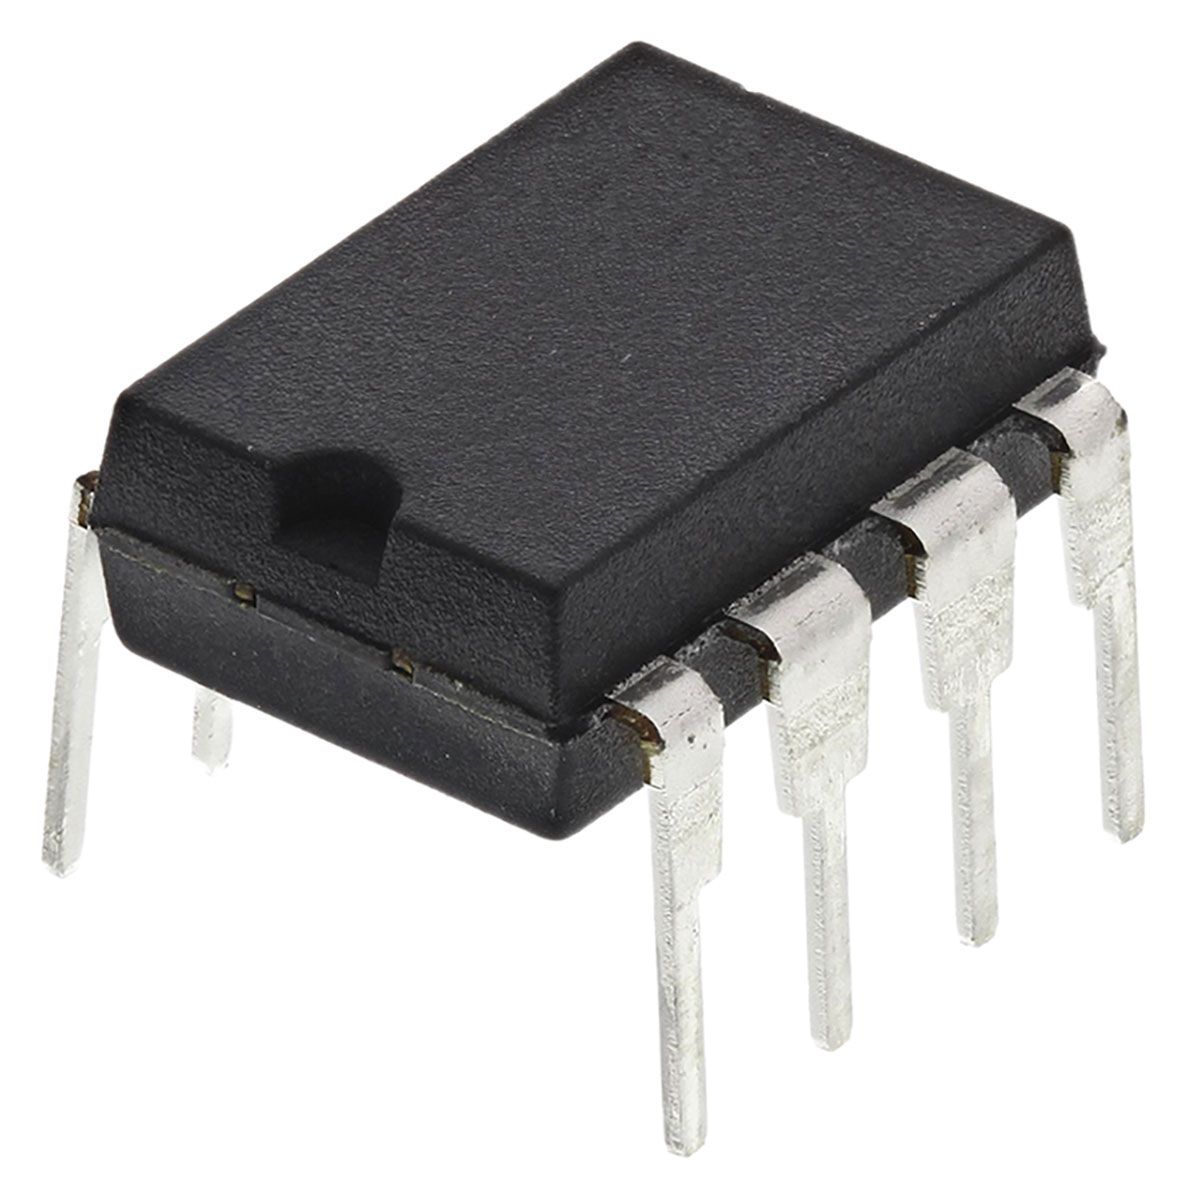 STMicroelectronics L4971, 1-Channel, Step Down DC-DC Converter, Adjustable 8-Pin, PDIP